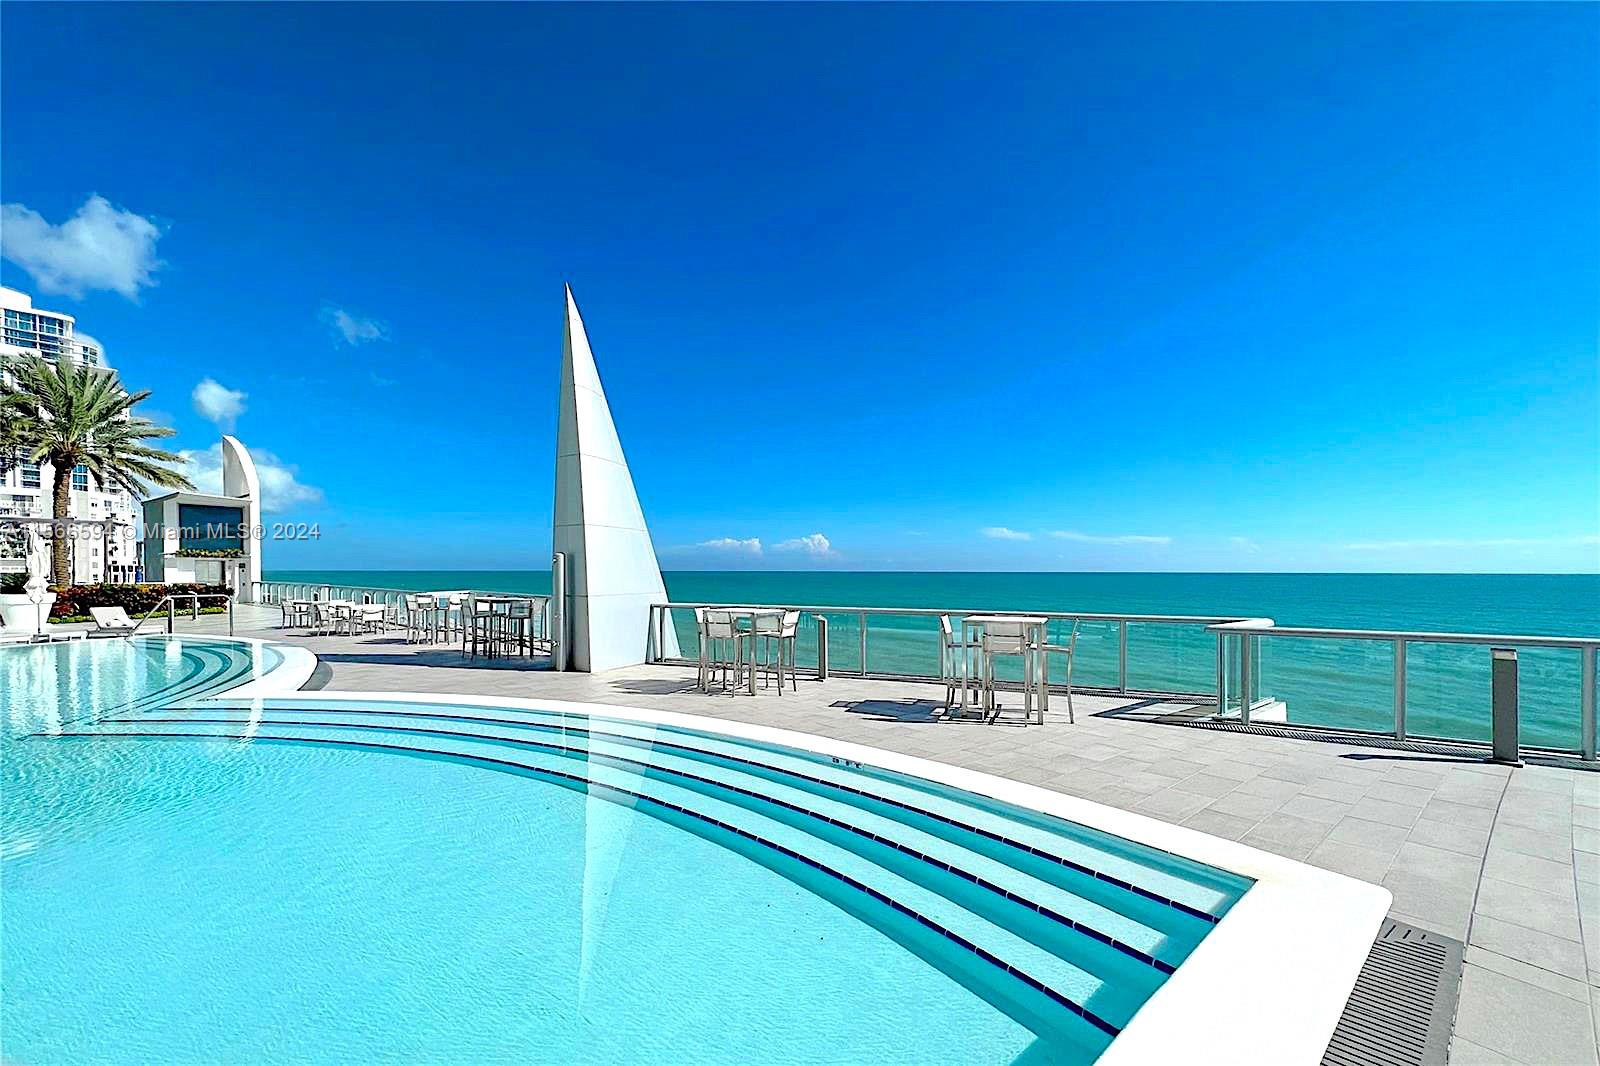 Rarely do you find a corner 4-bedroom apartment available for rent at the prestigious Jade Ocean, offering the ultimate oceanfront Miami lifestyle. Enjoy breathtaking views of the Atlantic Ocean and the city. The building features an array of incredible amenities including food service, a fantastic fitness center, spa, child and teens playroom, business center, movie theatre, morning and afternoon sun pools, and much more. This is an opportunity to impress even your most discerning clients. Located in the heart of Sunny Isles Beach within walking distance you'll find a variety of restaurants, grocery stores, and coffee shops.